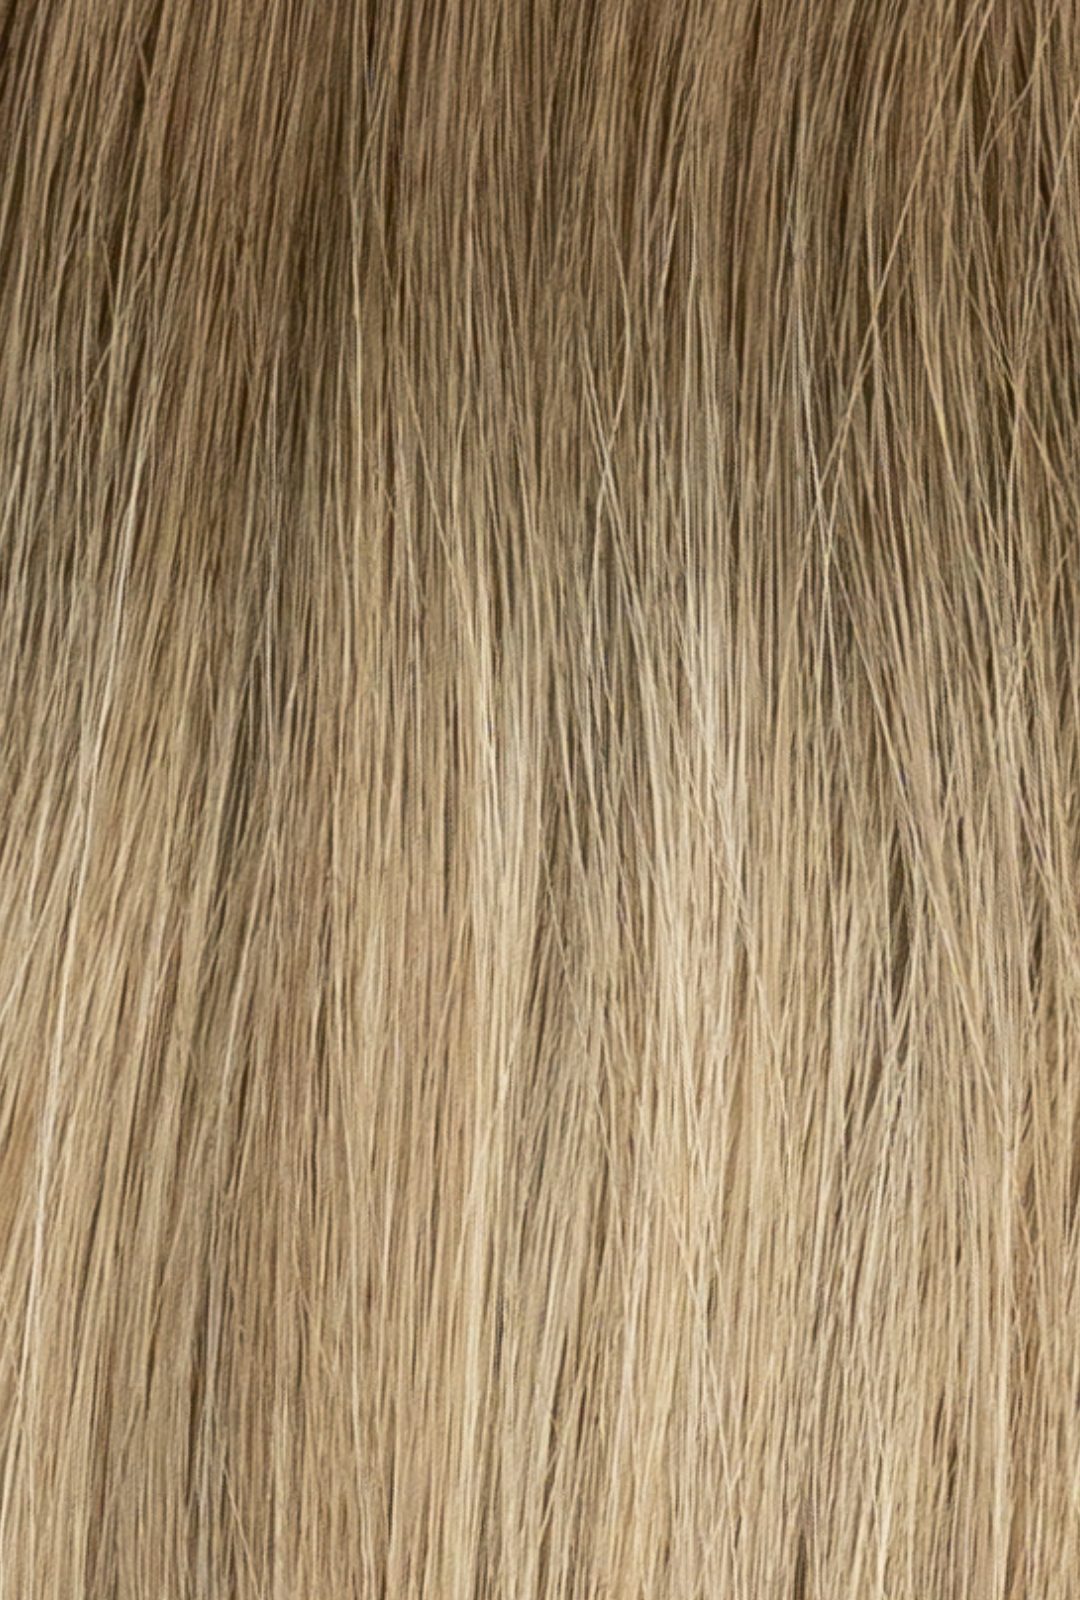 Laced Hair Keratin Bond Extensions Rooted #6/D8/60